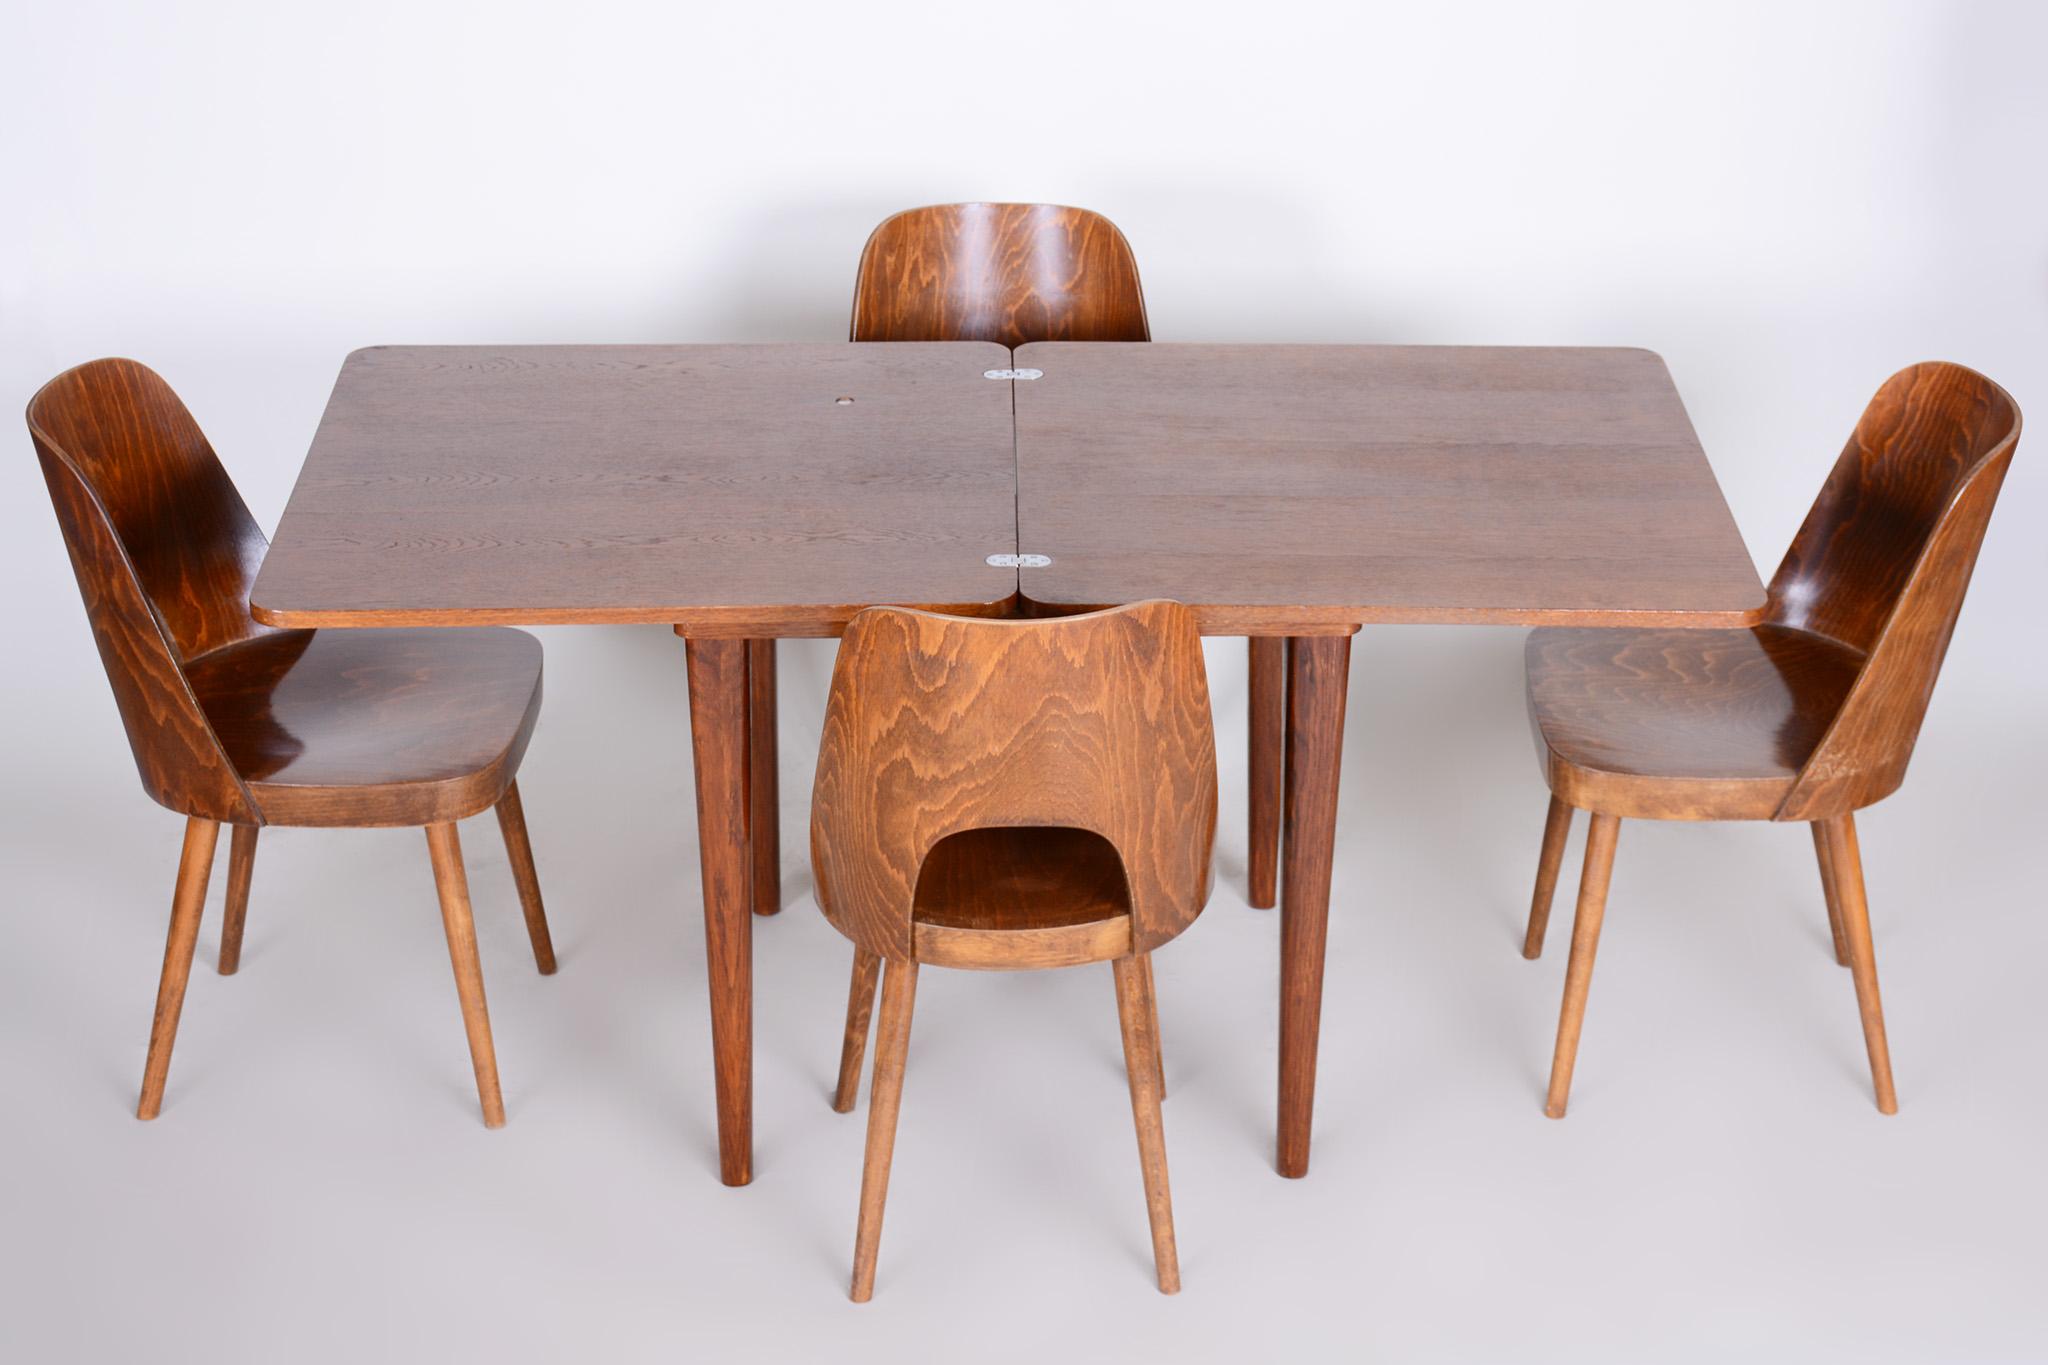 Small Folding Dining Table Made in 1940s Czechia, Designed by Halabala 3